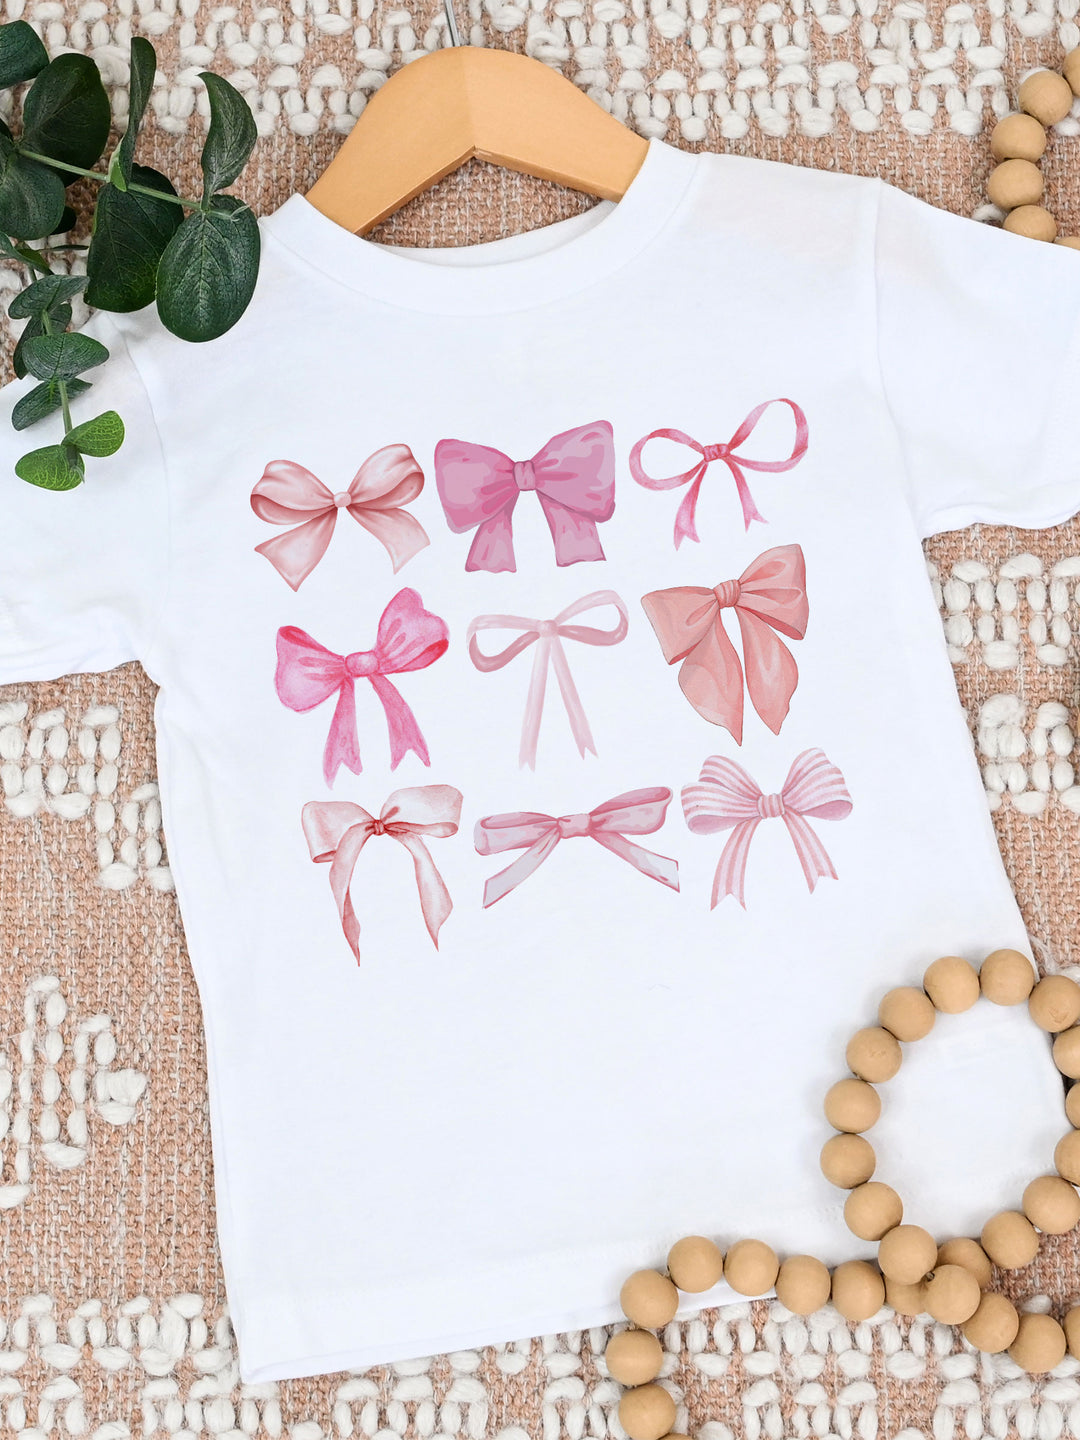 Pink Bows Kids Graphic Tee